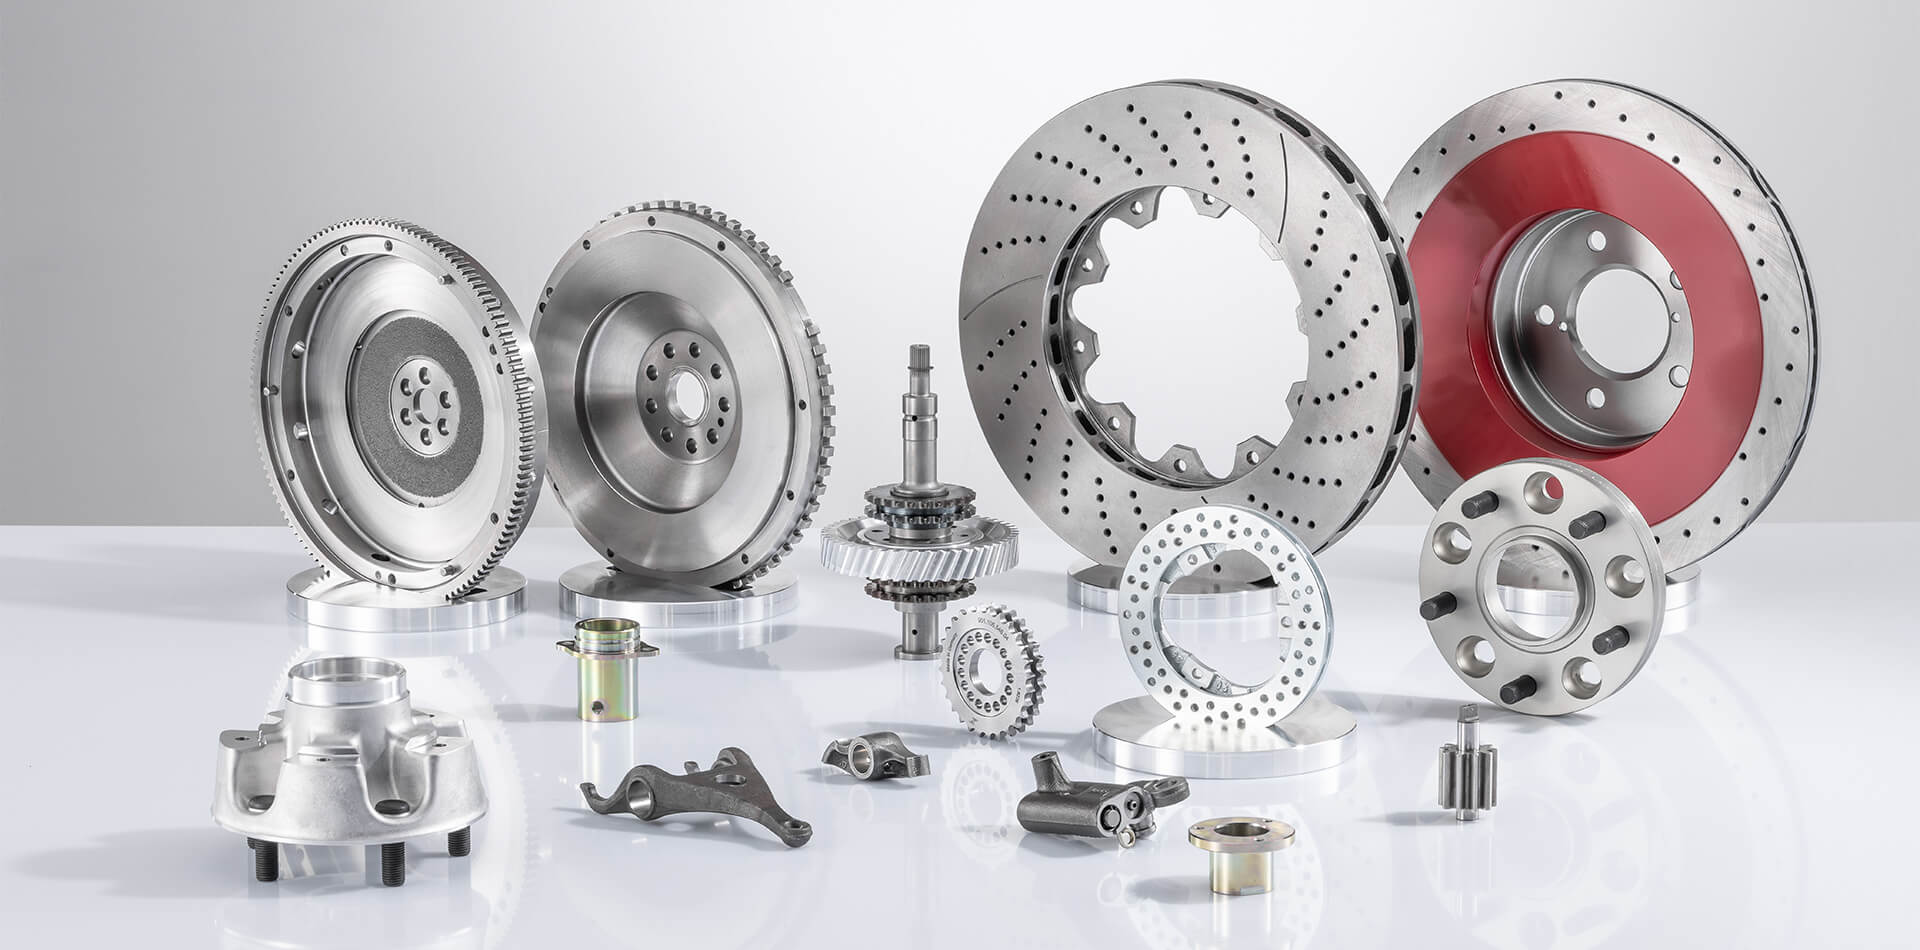 Manufacturer of original spare parts for almost all models of the Porsche brand